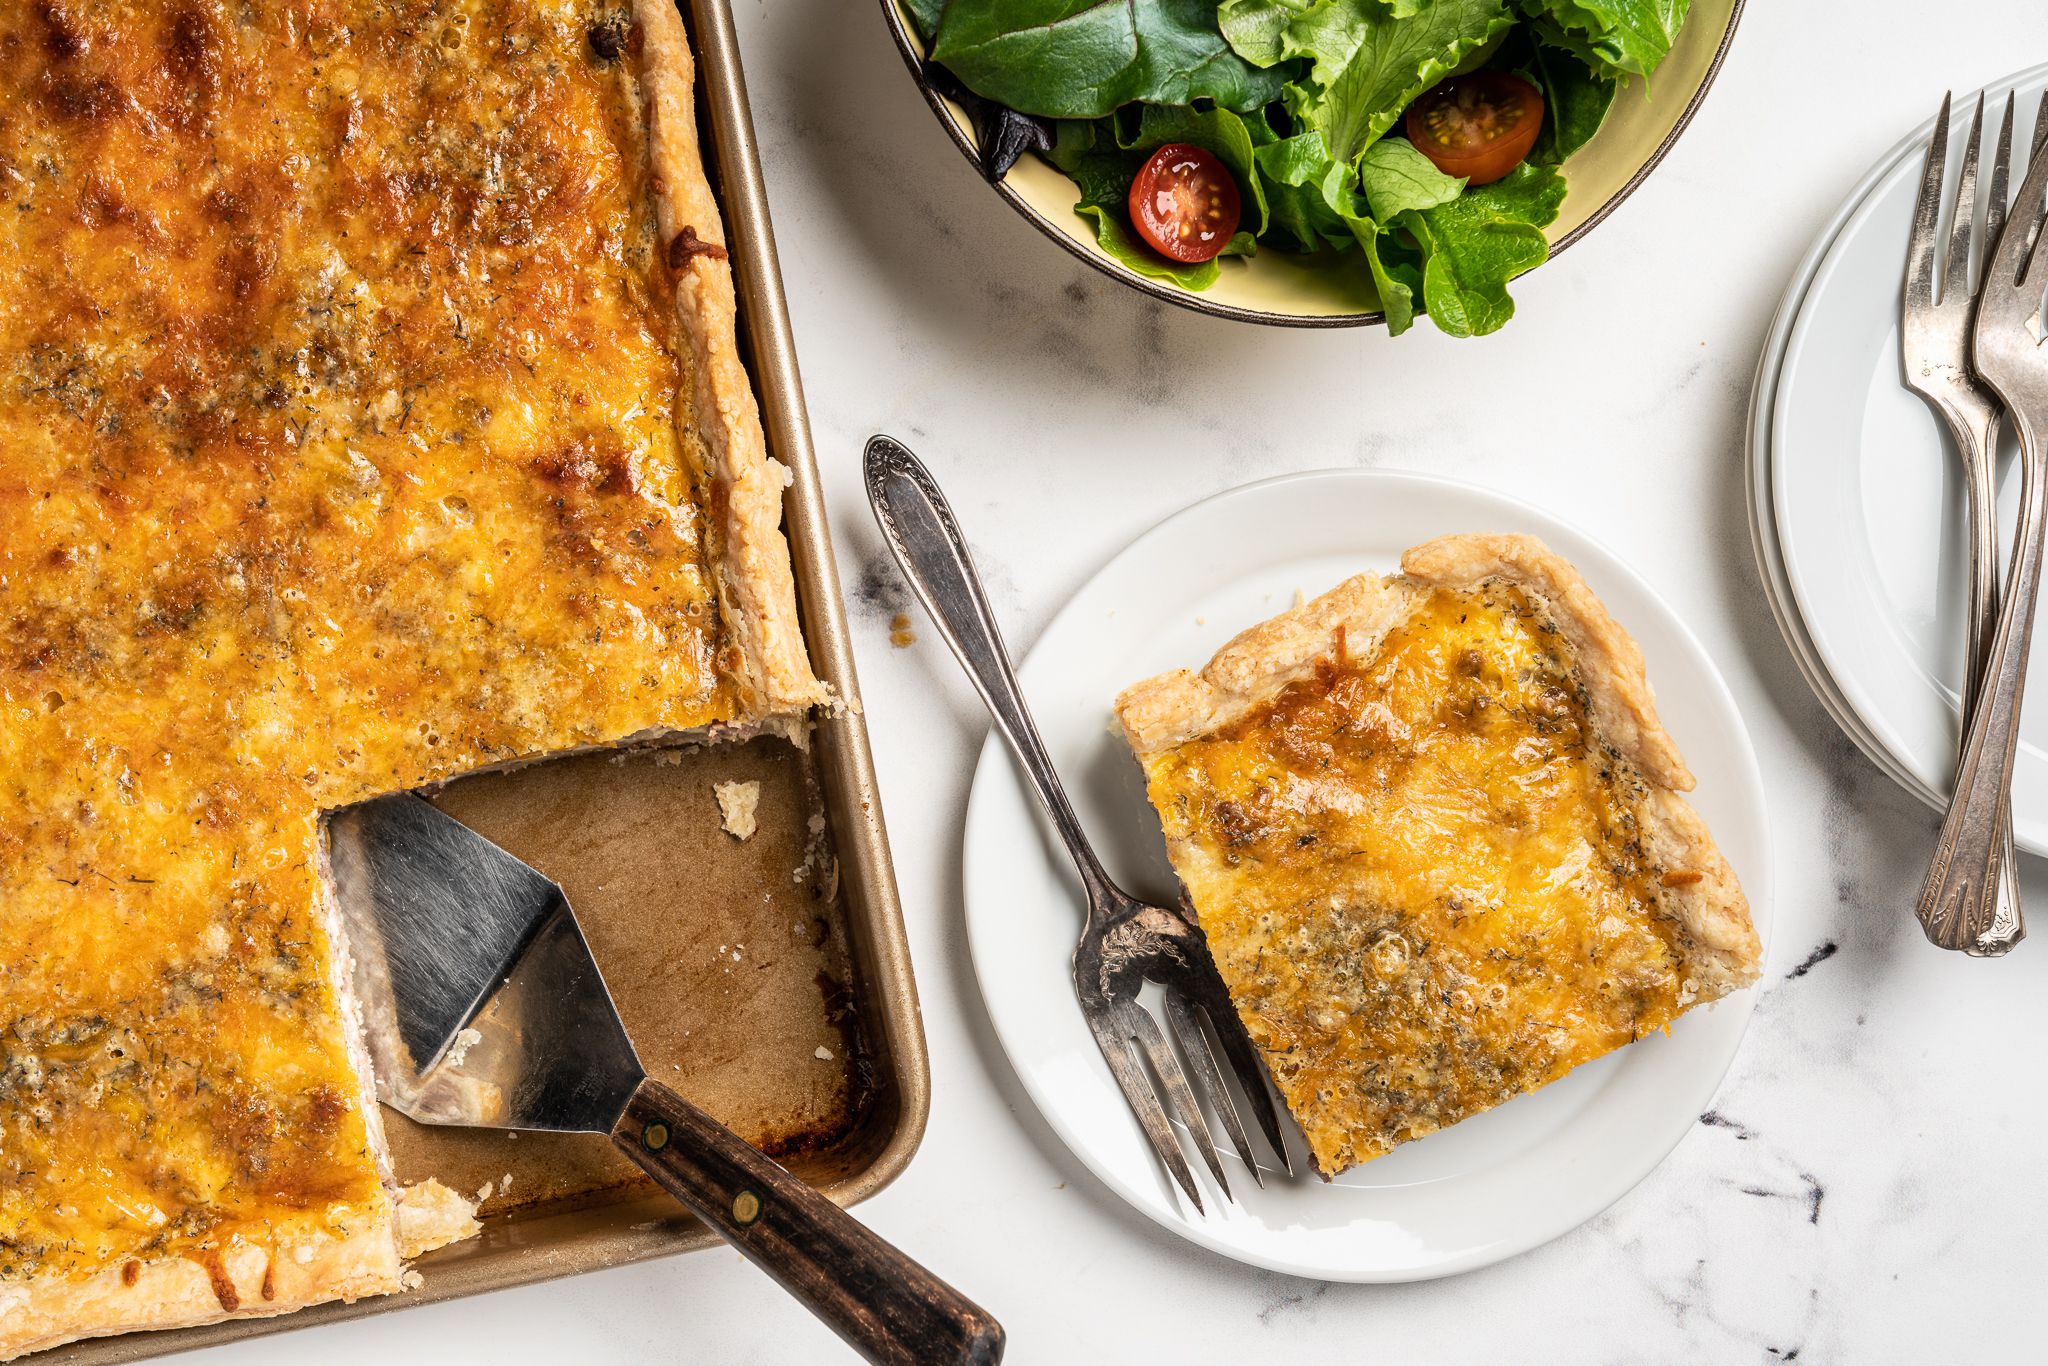 Beefy, Cheesy Sheet Pan Quiche